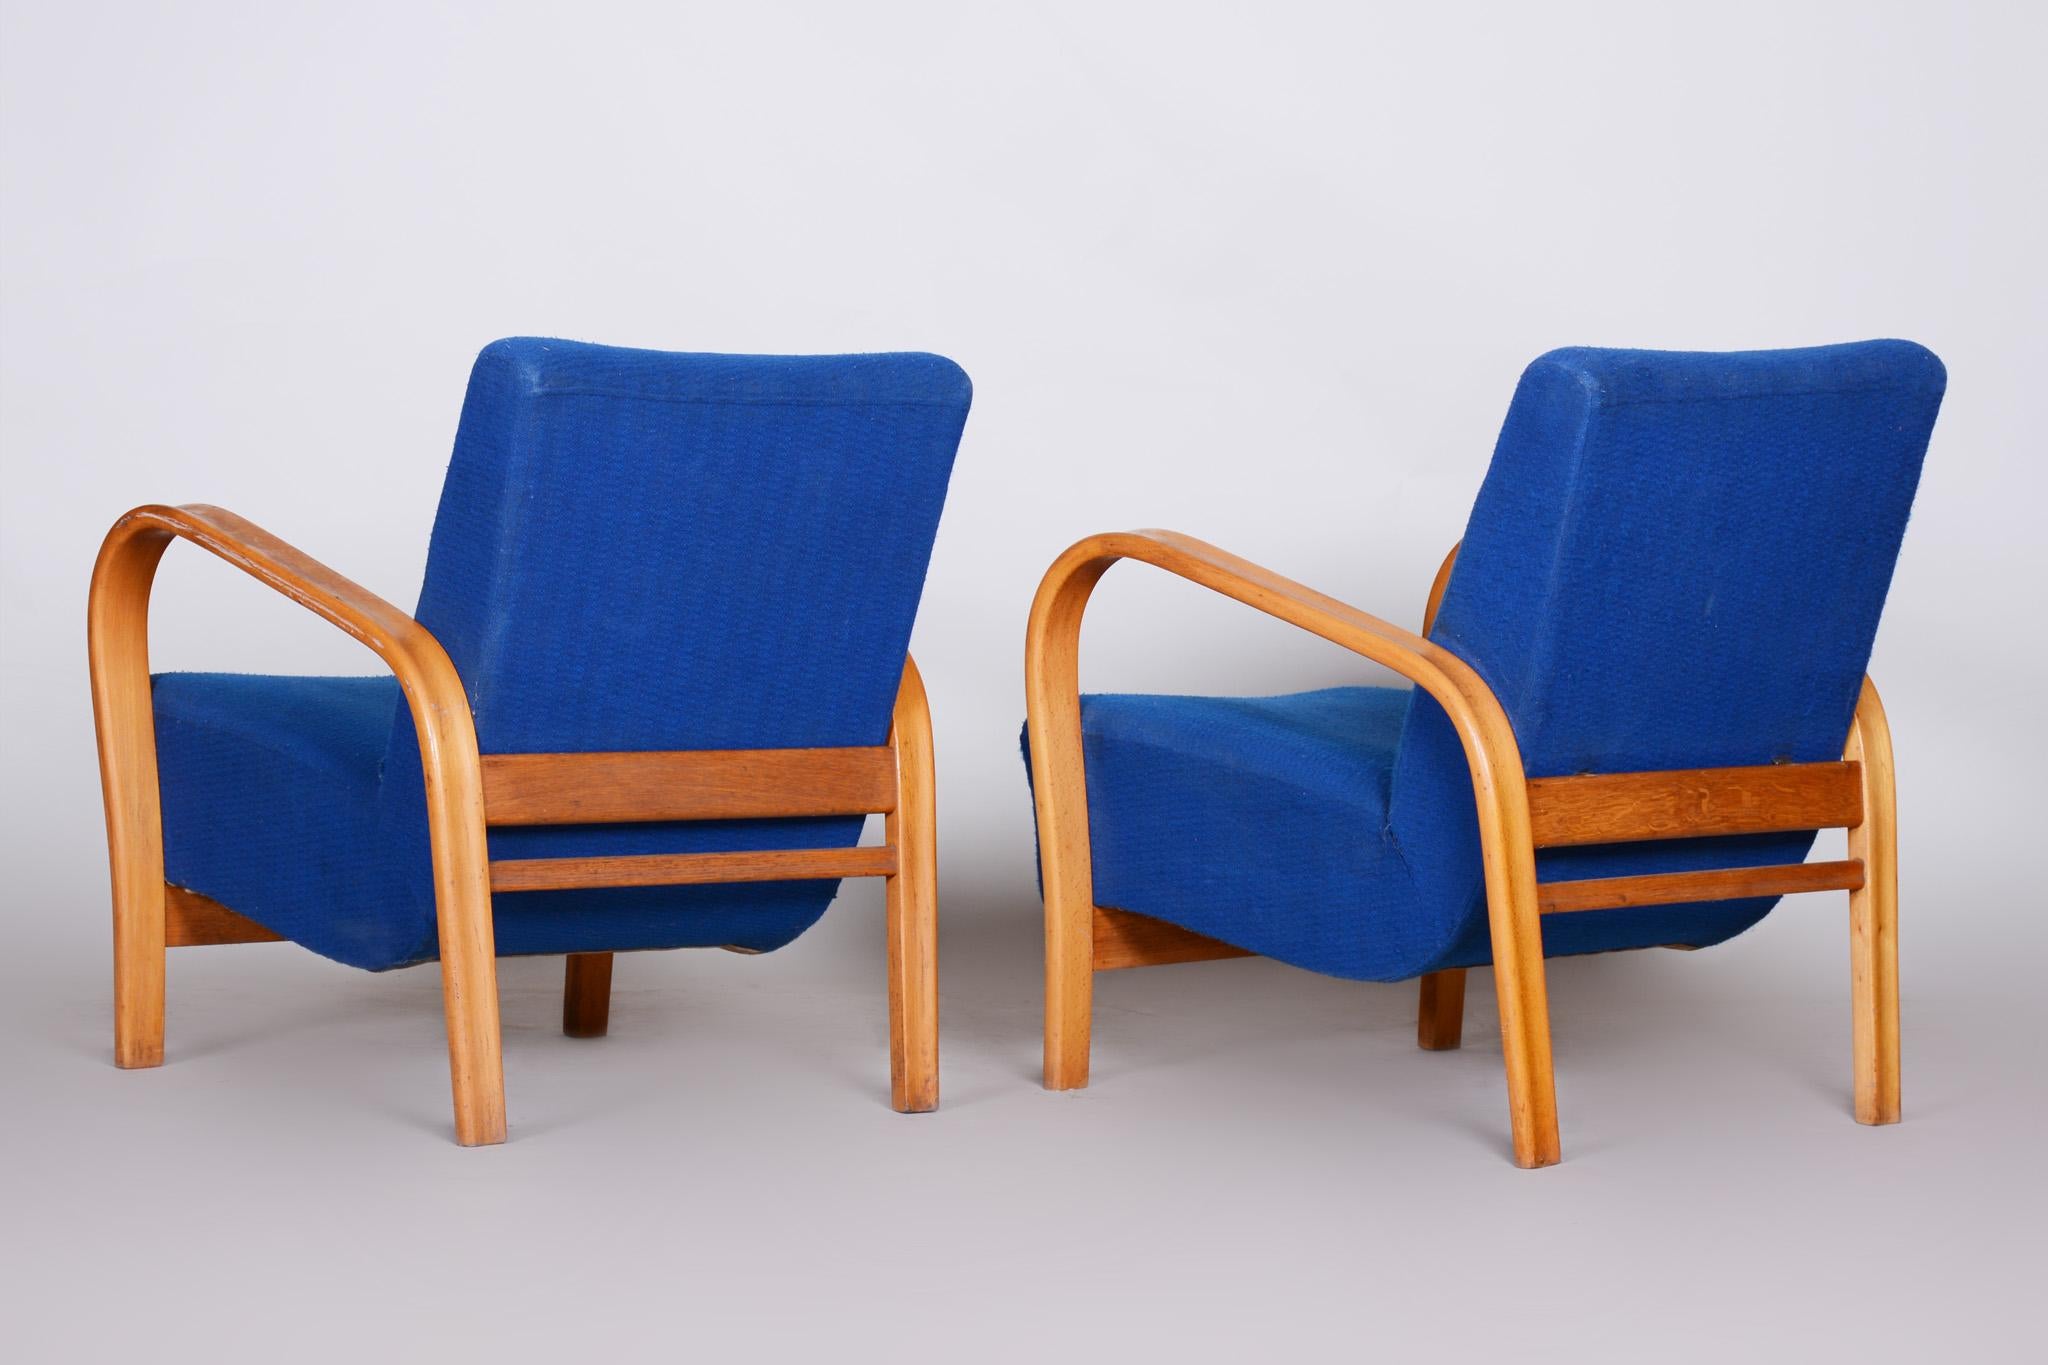 Mid-Century Modern Pair of Mid Century Armchairs Made in Czechia 1930s, Collaboration with Halabala